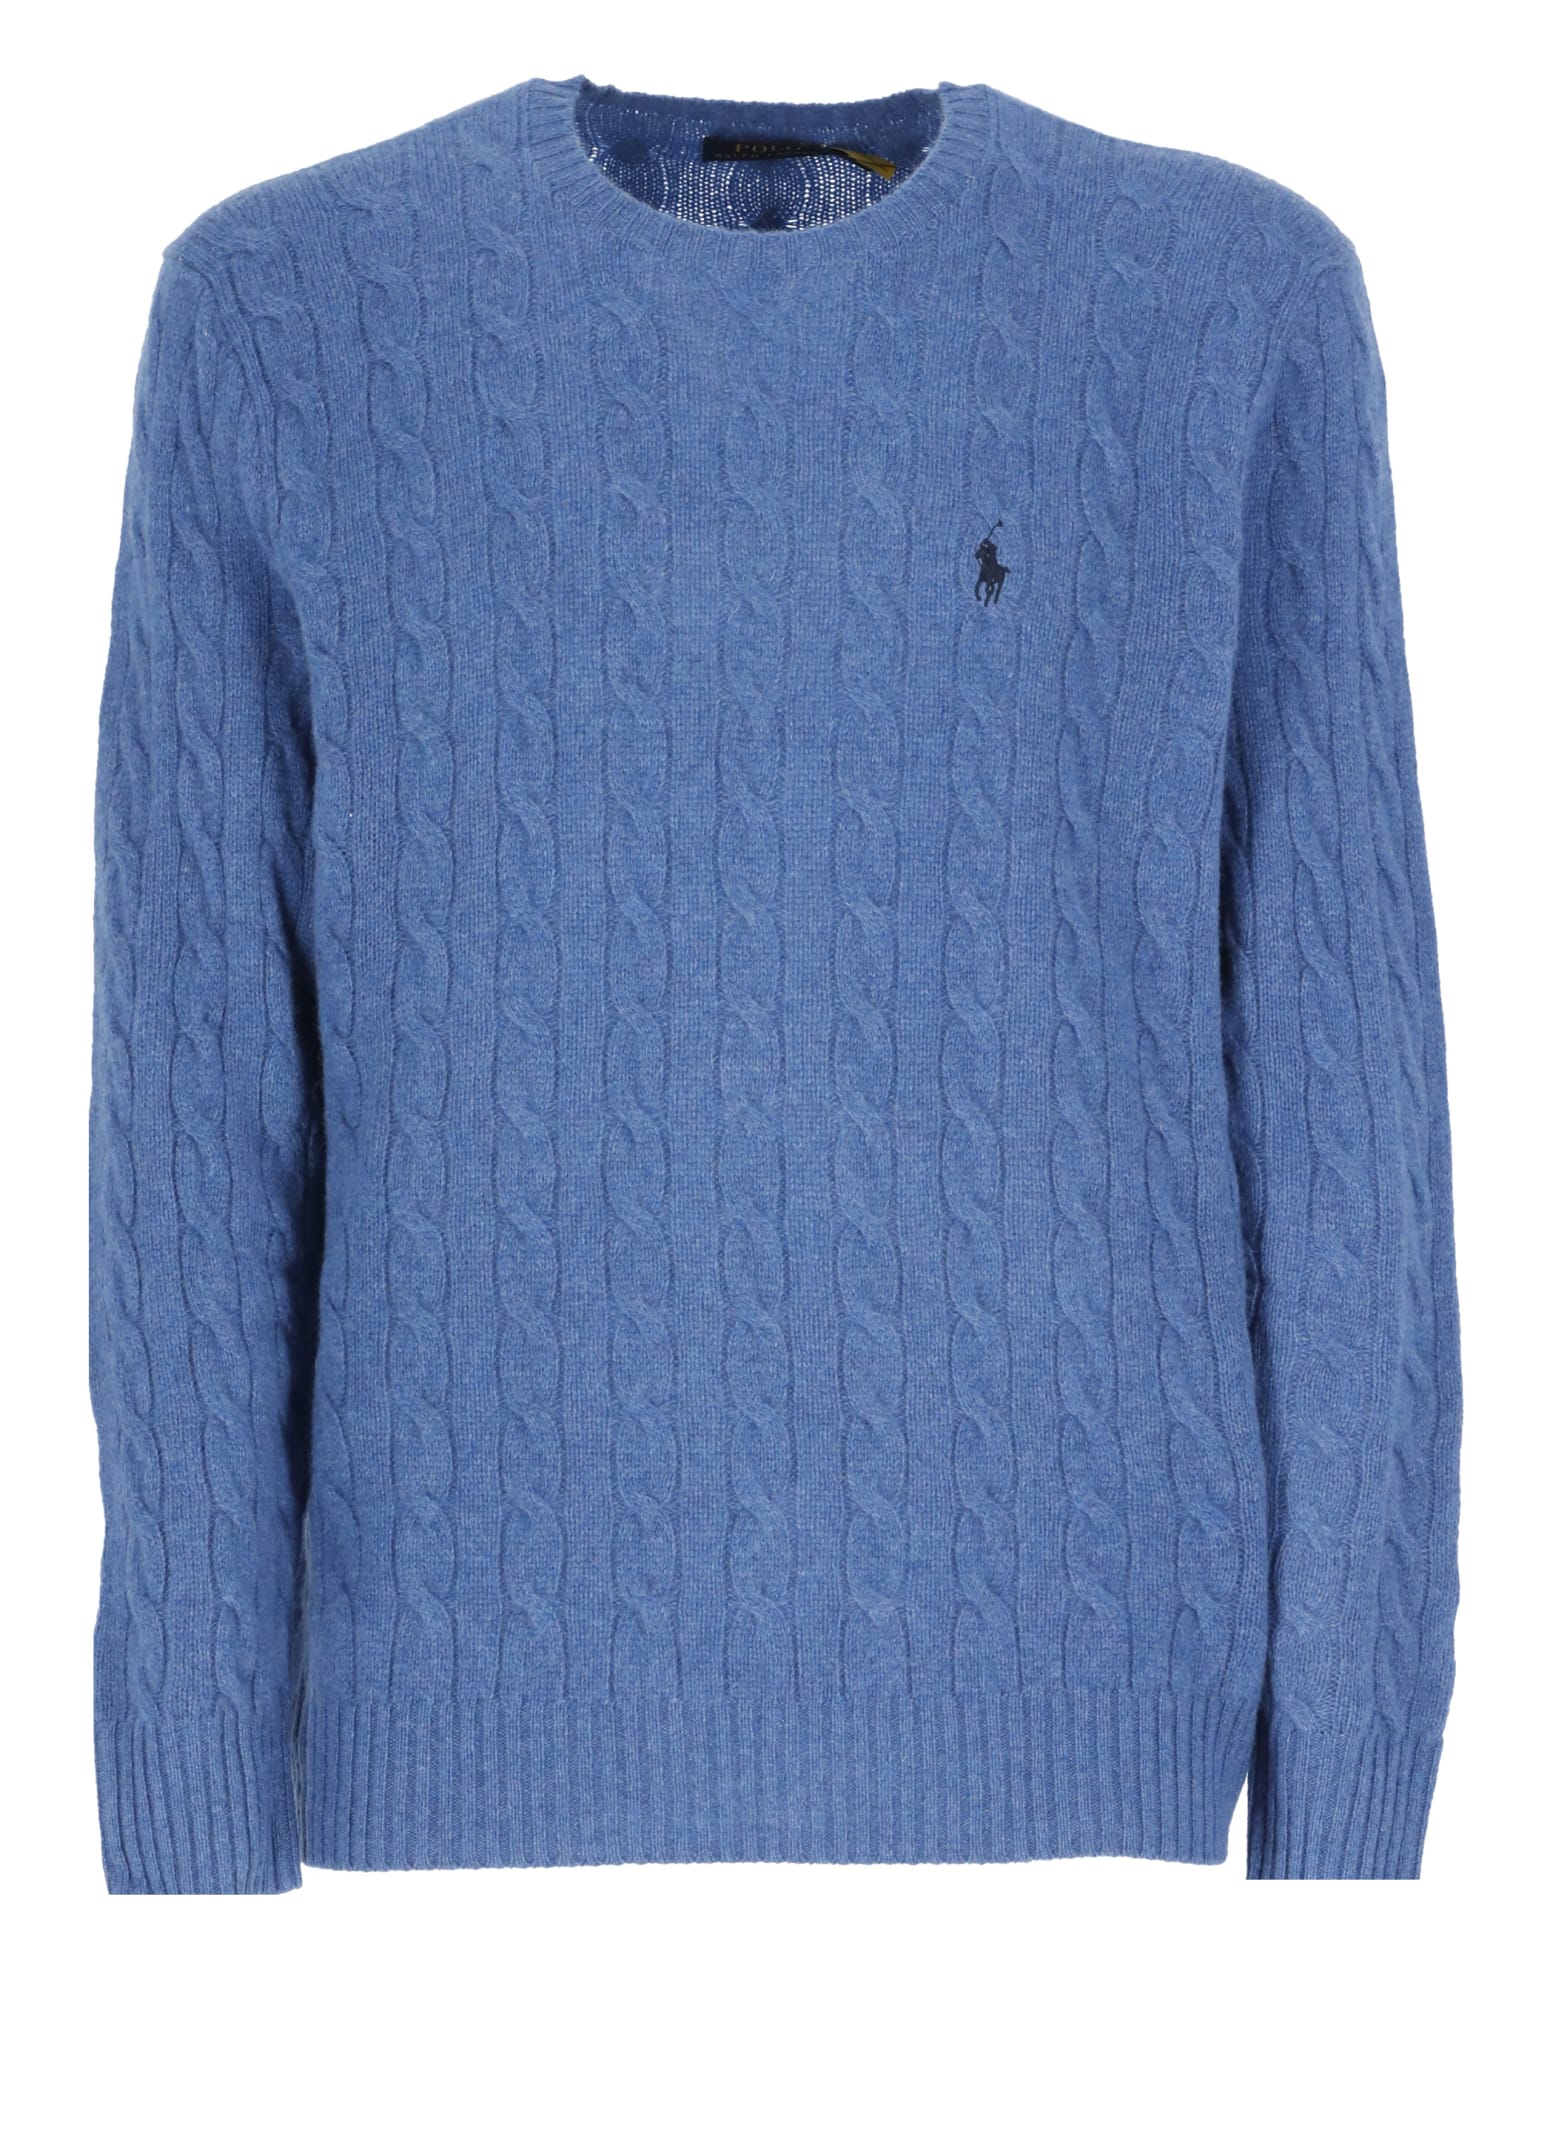 Ralph Lauren Wool And Cashmere Sweater